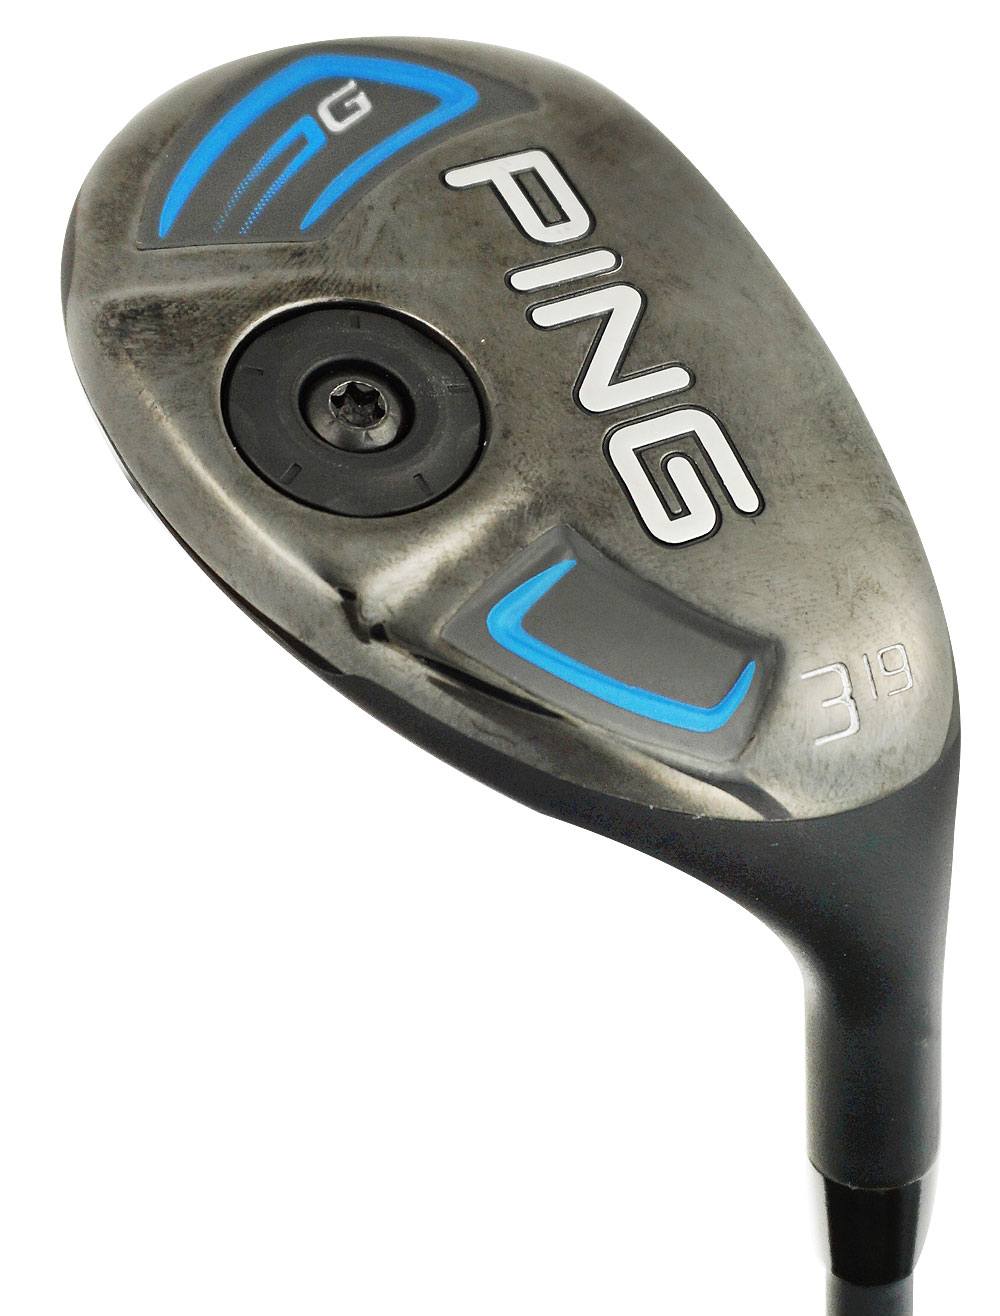 Pre-Owned Ping Golf G400 Hybrid | RockBottomGolf.com